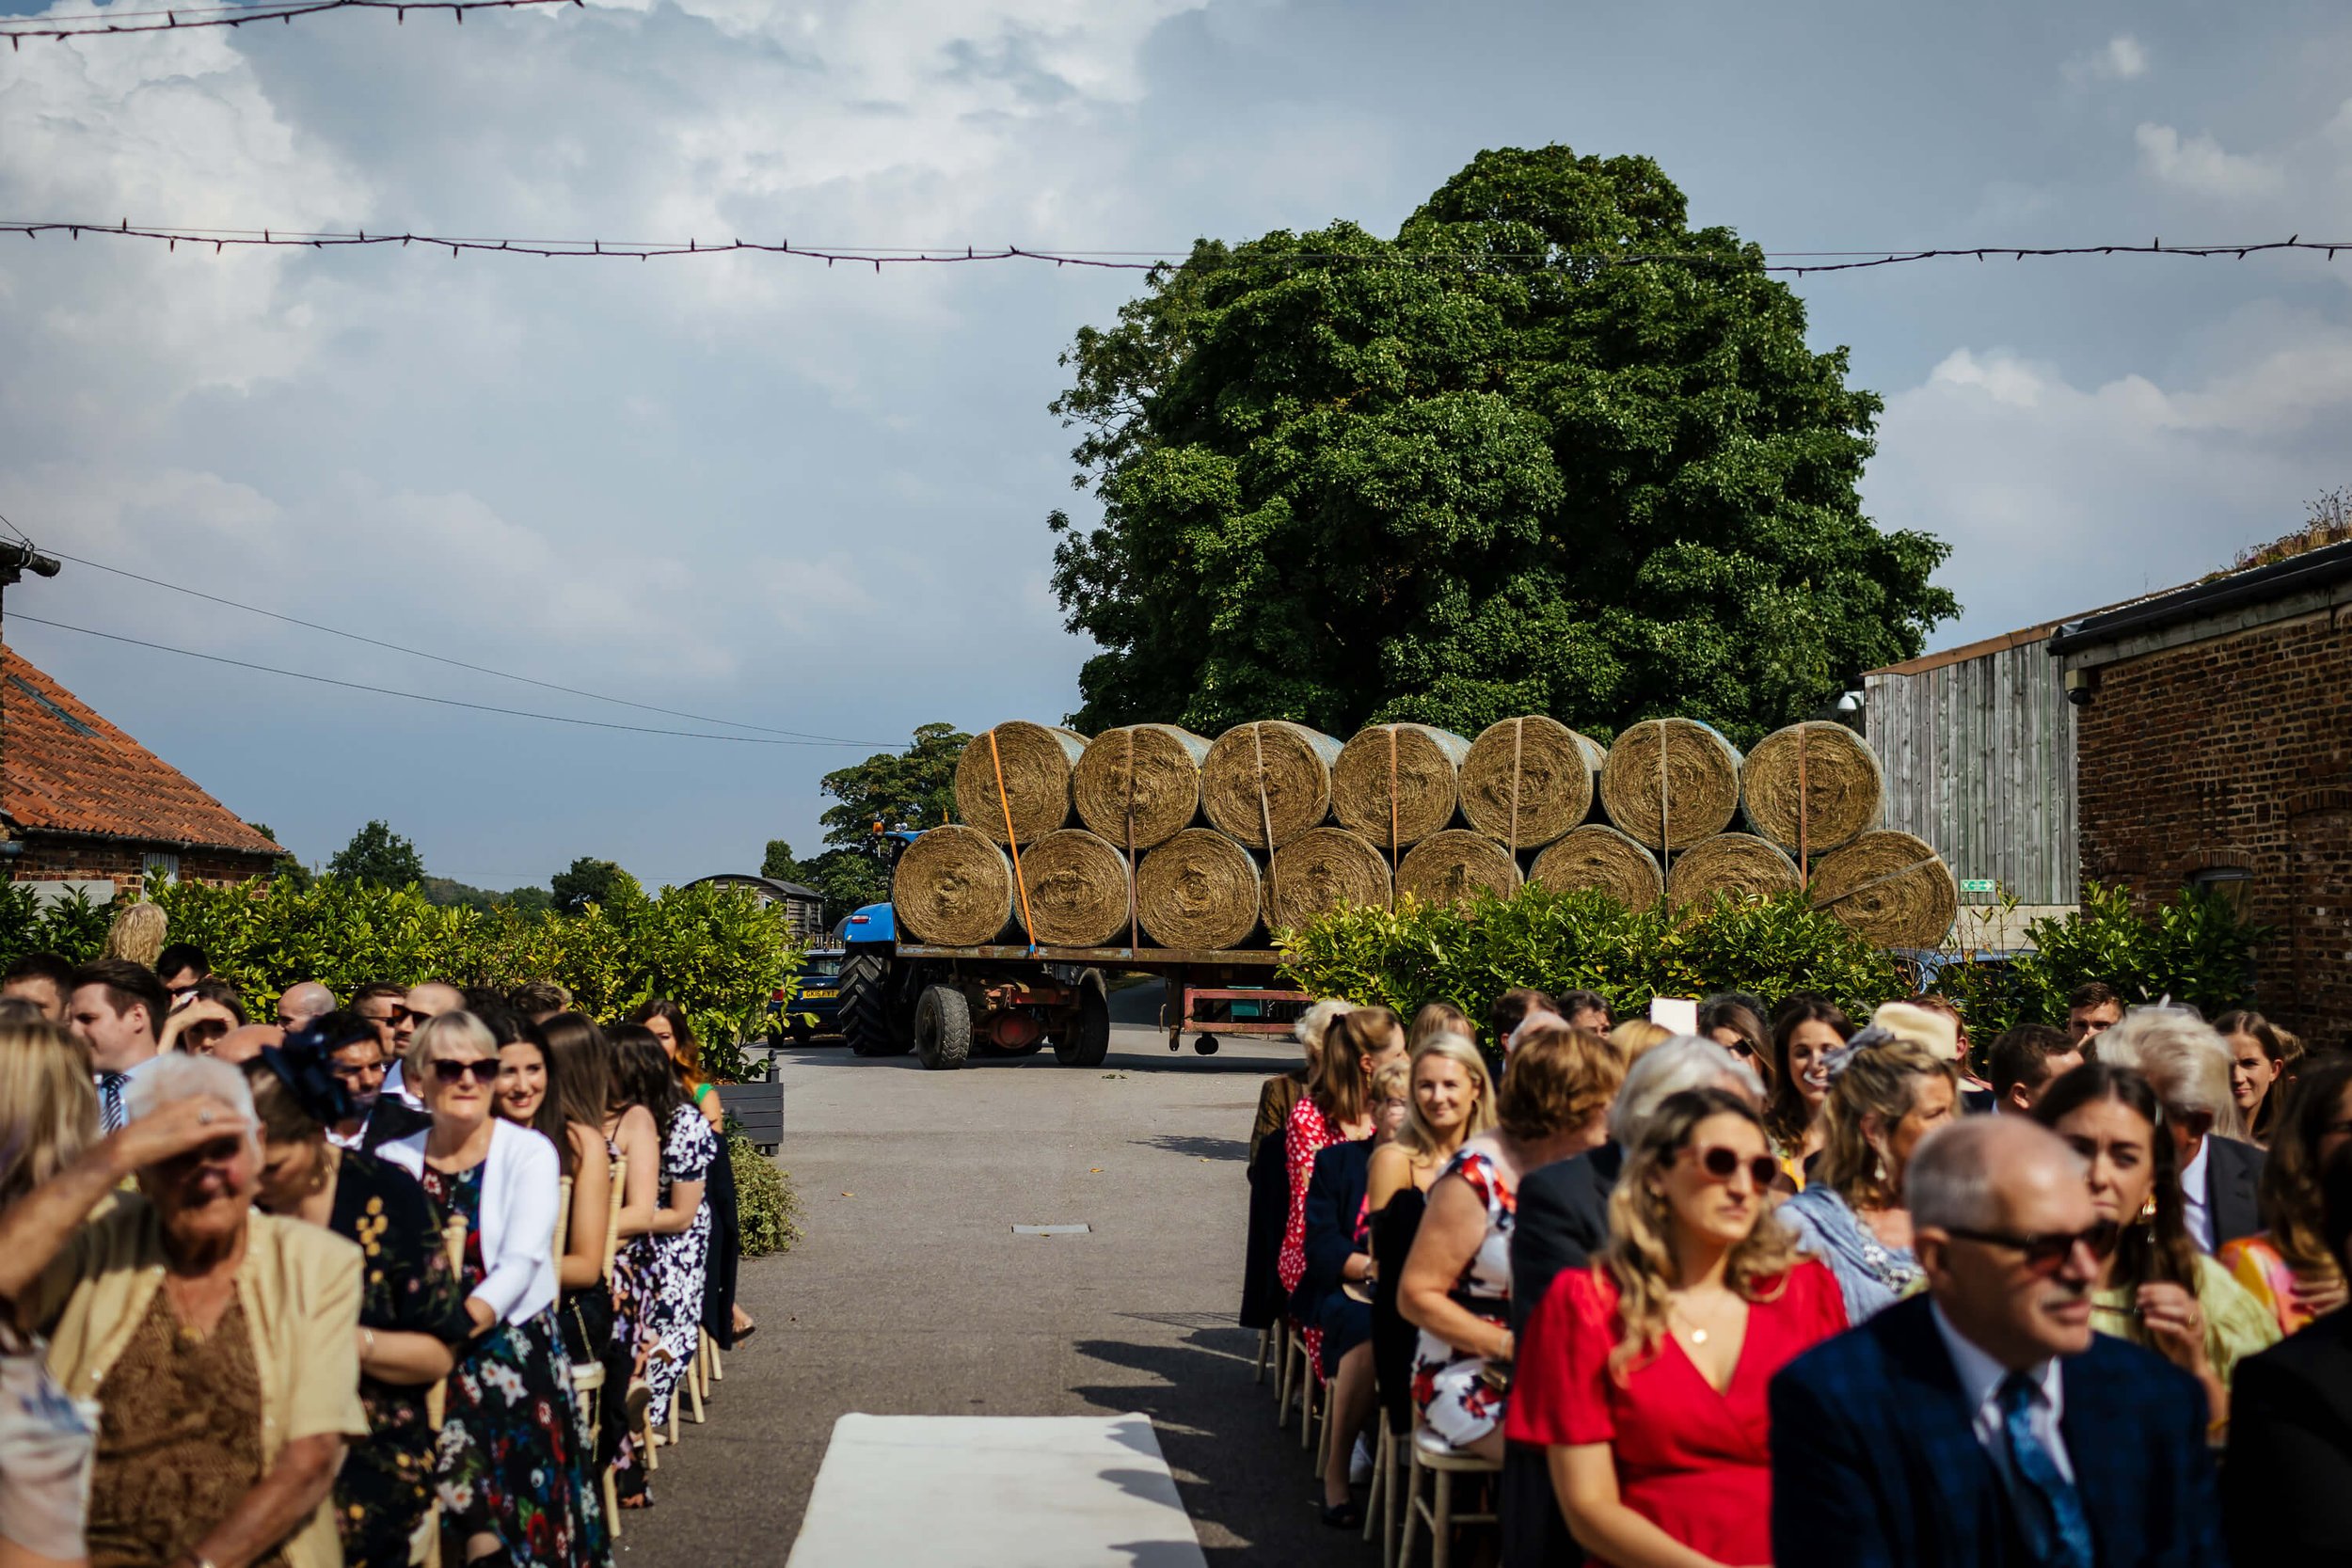 Tractor with hay bails interrupting a wedding cermeony